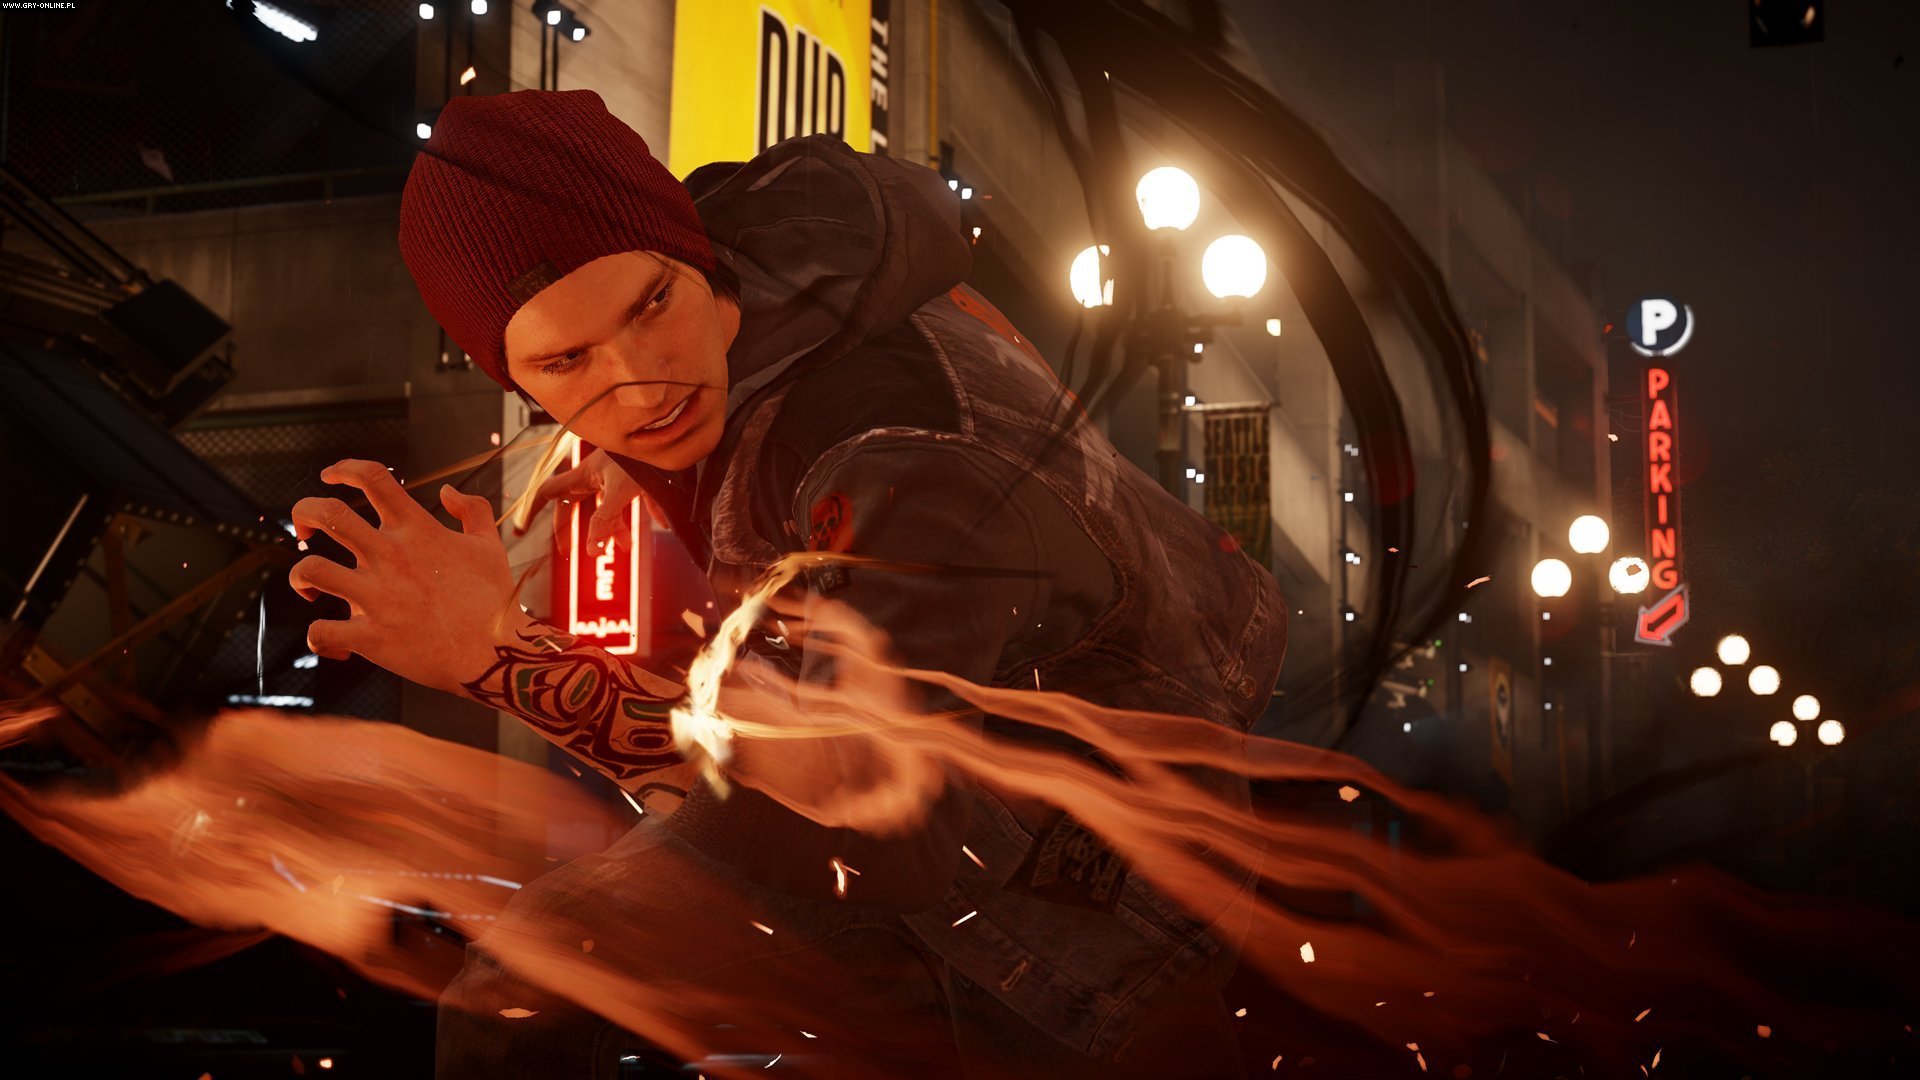 Download Full Hd 1080p Infamous Second Son Pc Wallpaper Id